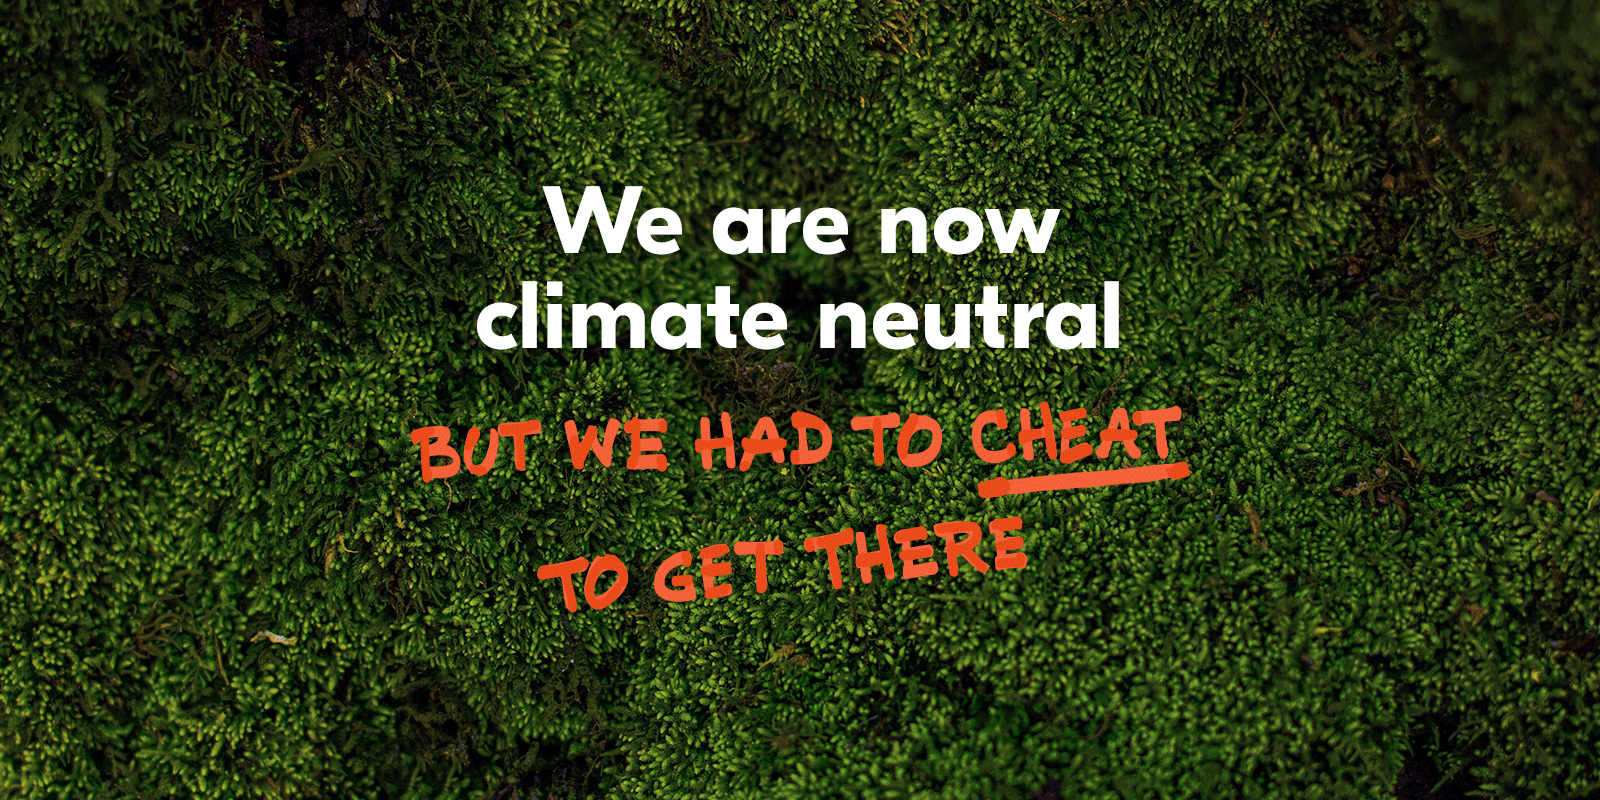 We are now climate neutral but we had to cheat to get there